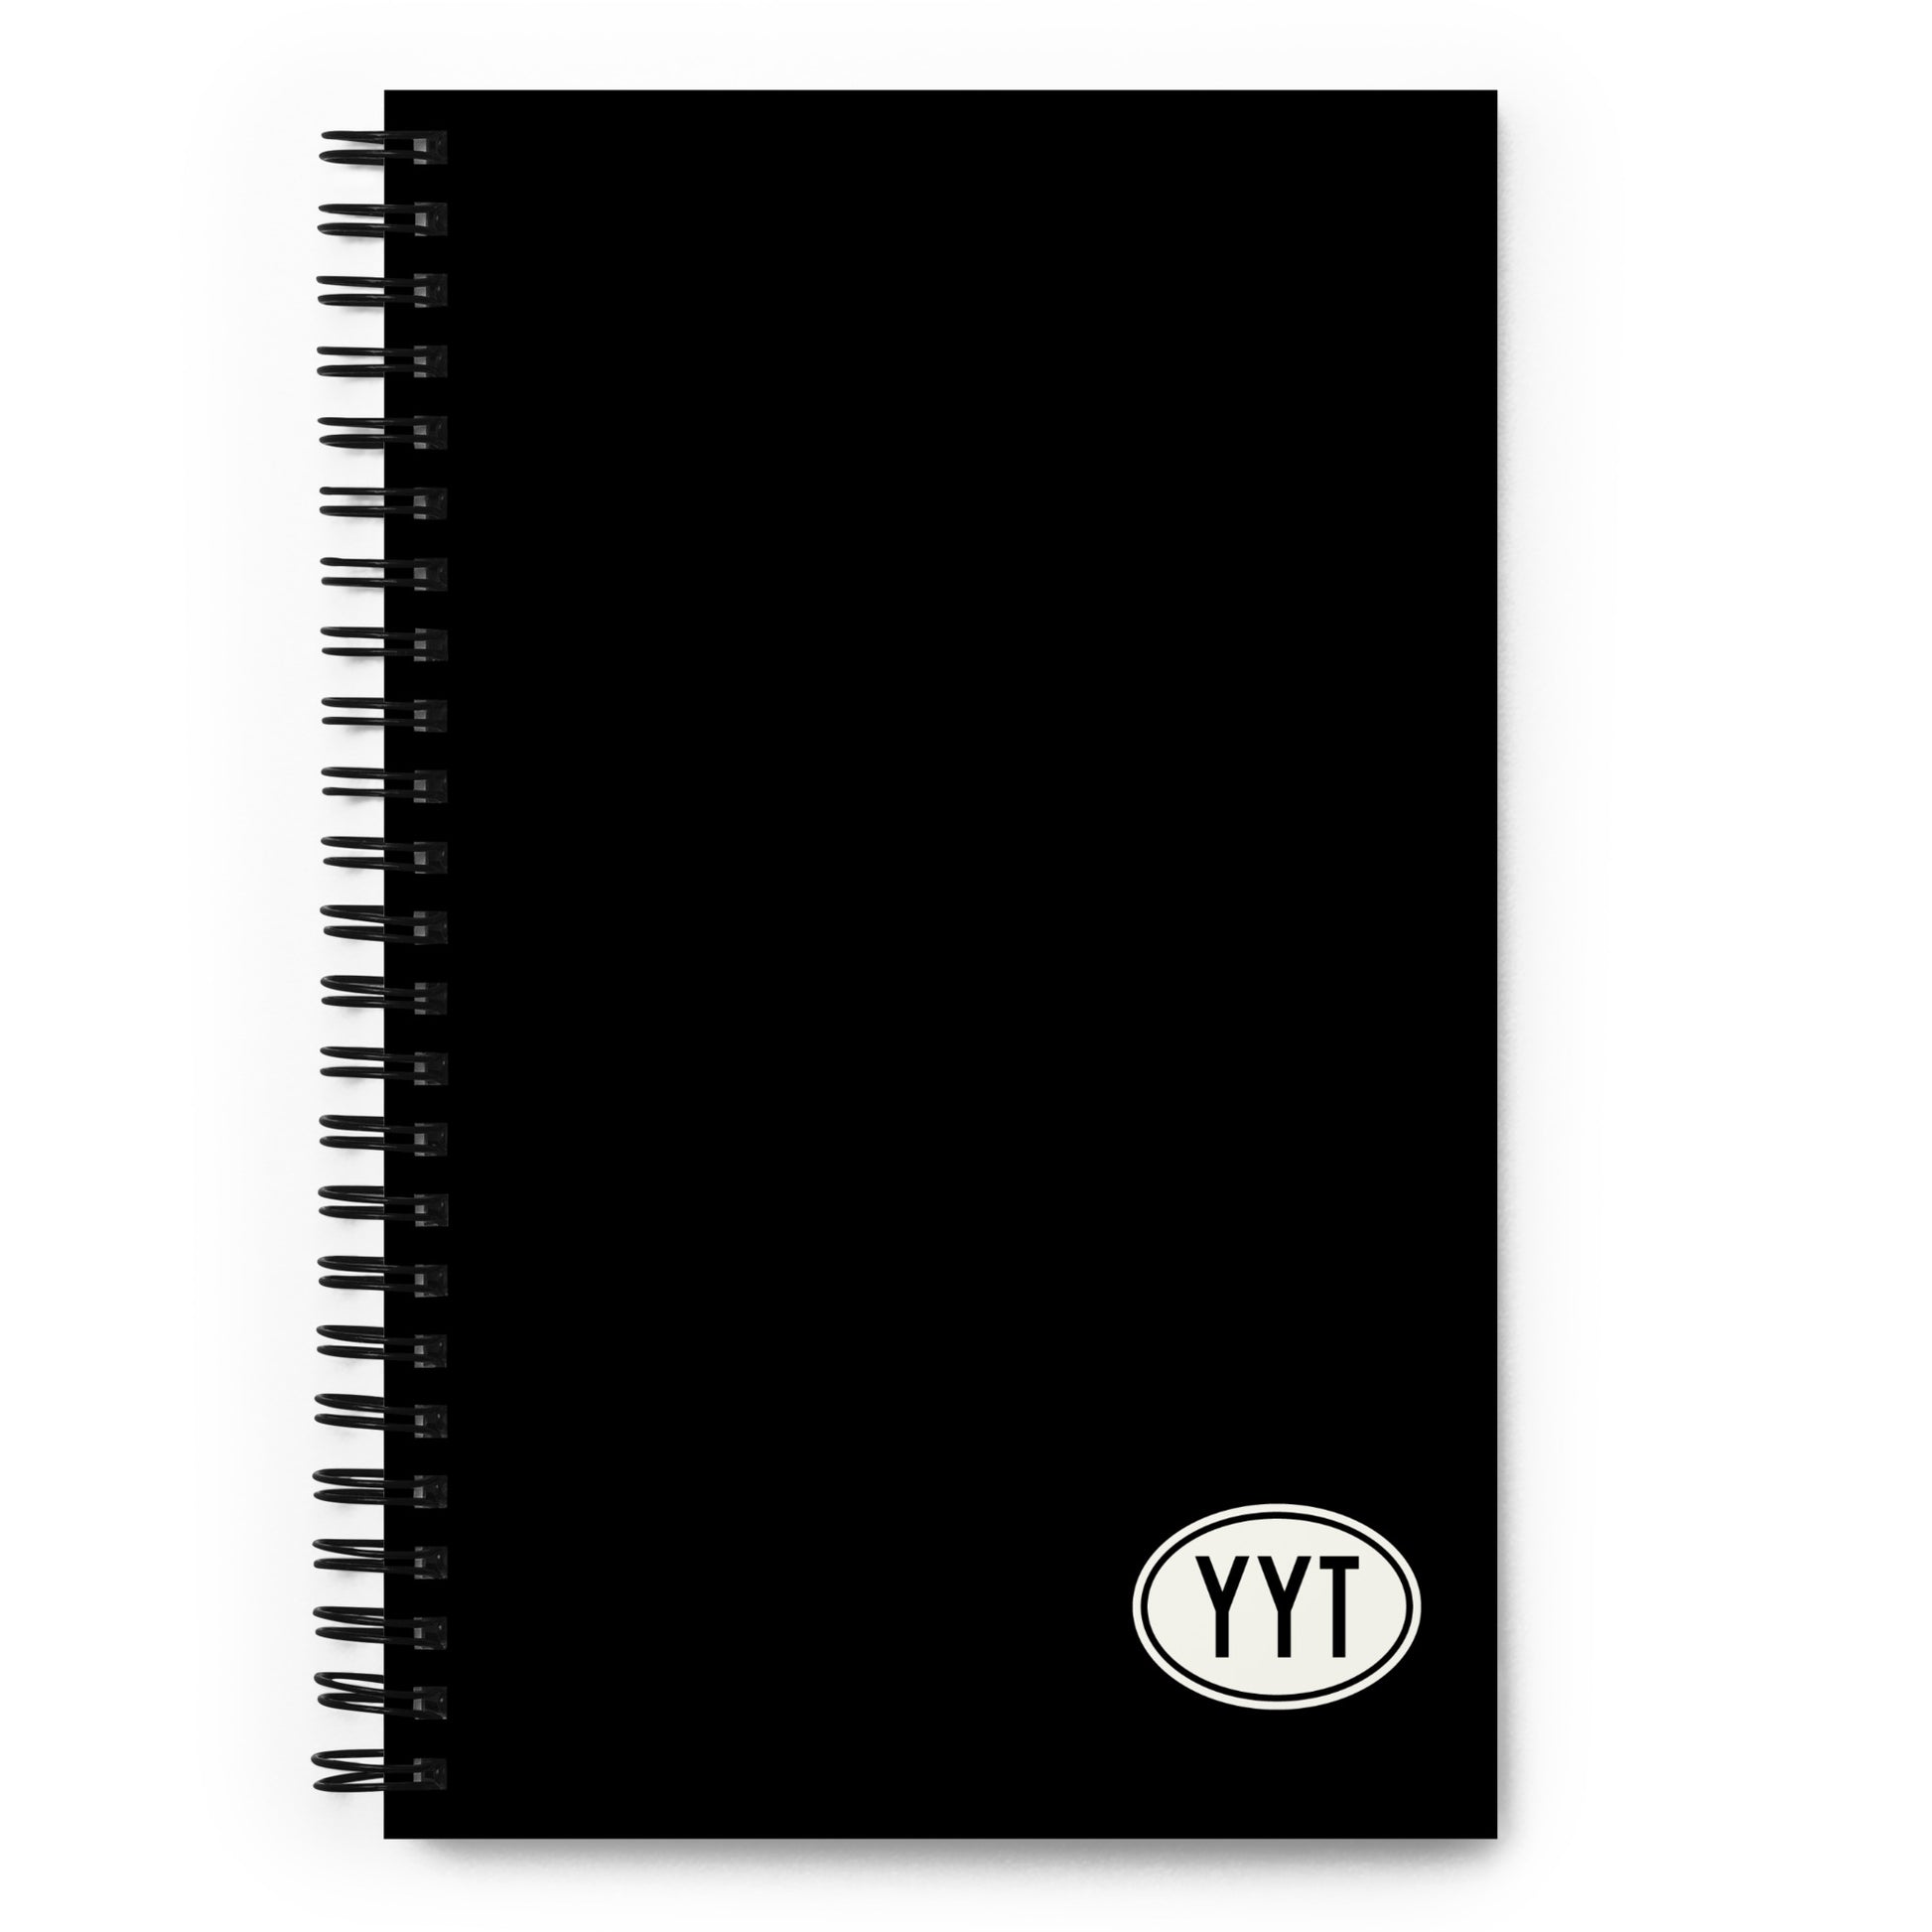 Unique Travel Gift Spiral Notebook - White Oval • YYT St. John's • YHM Designs - Image 01